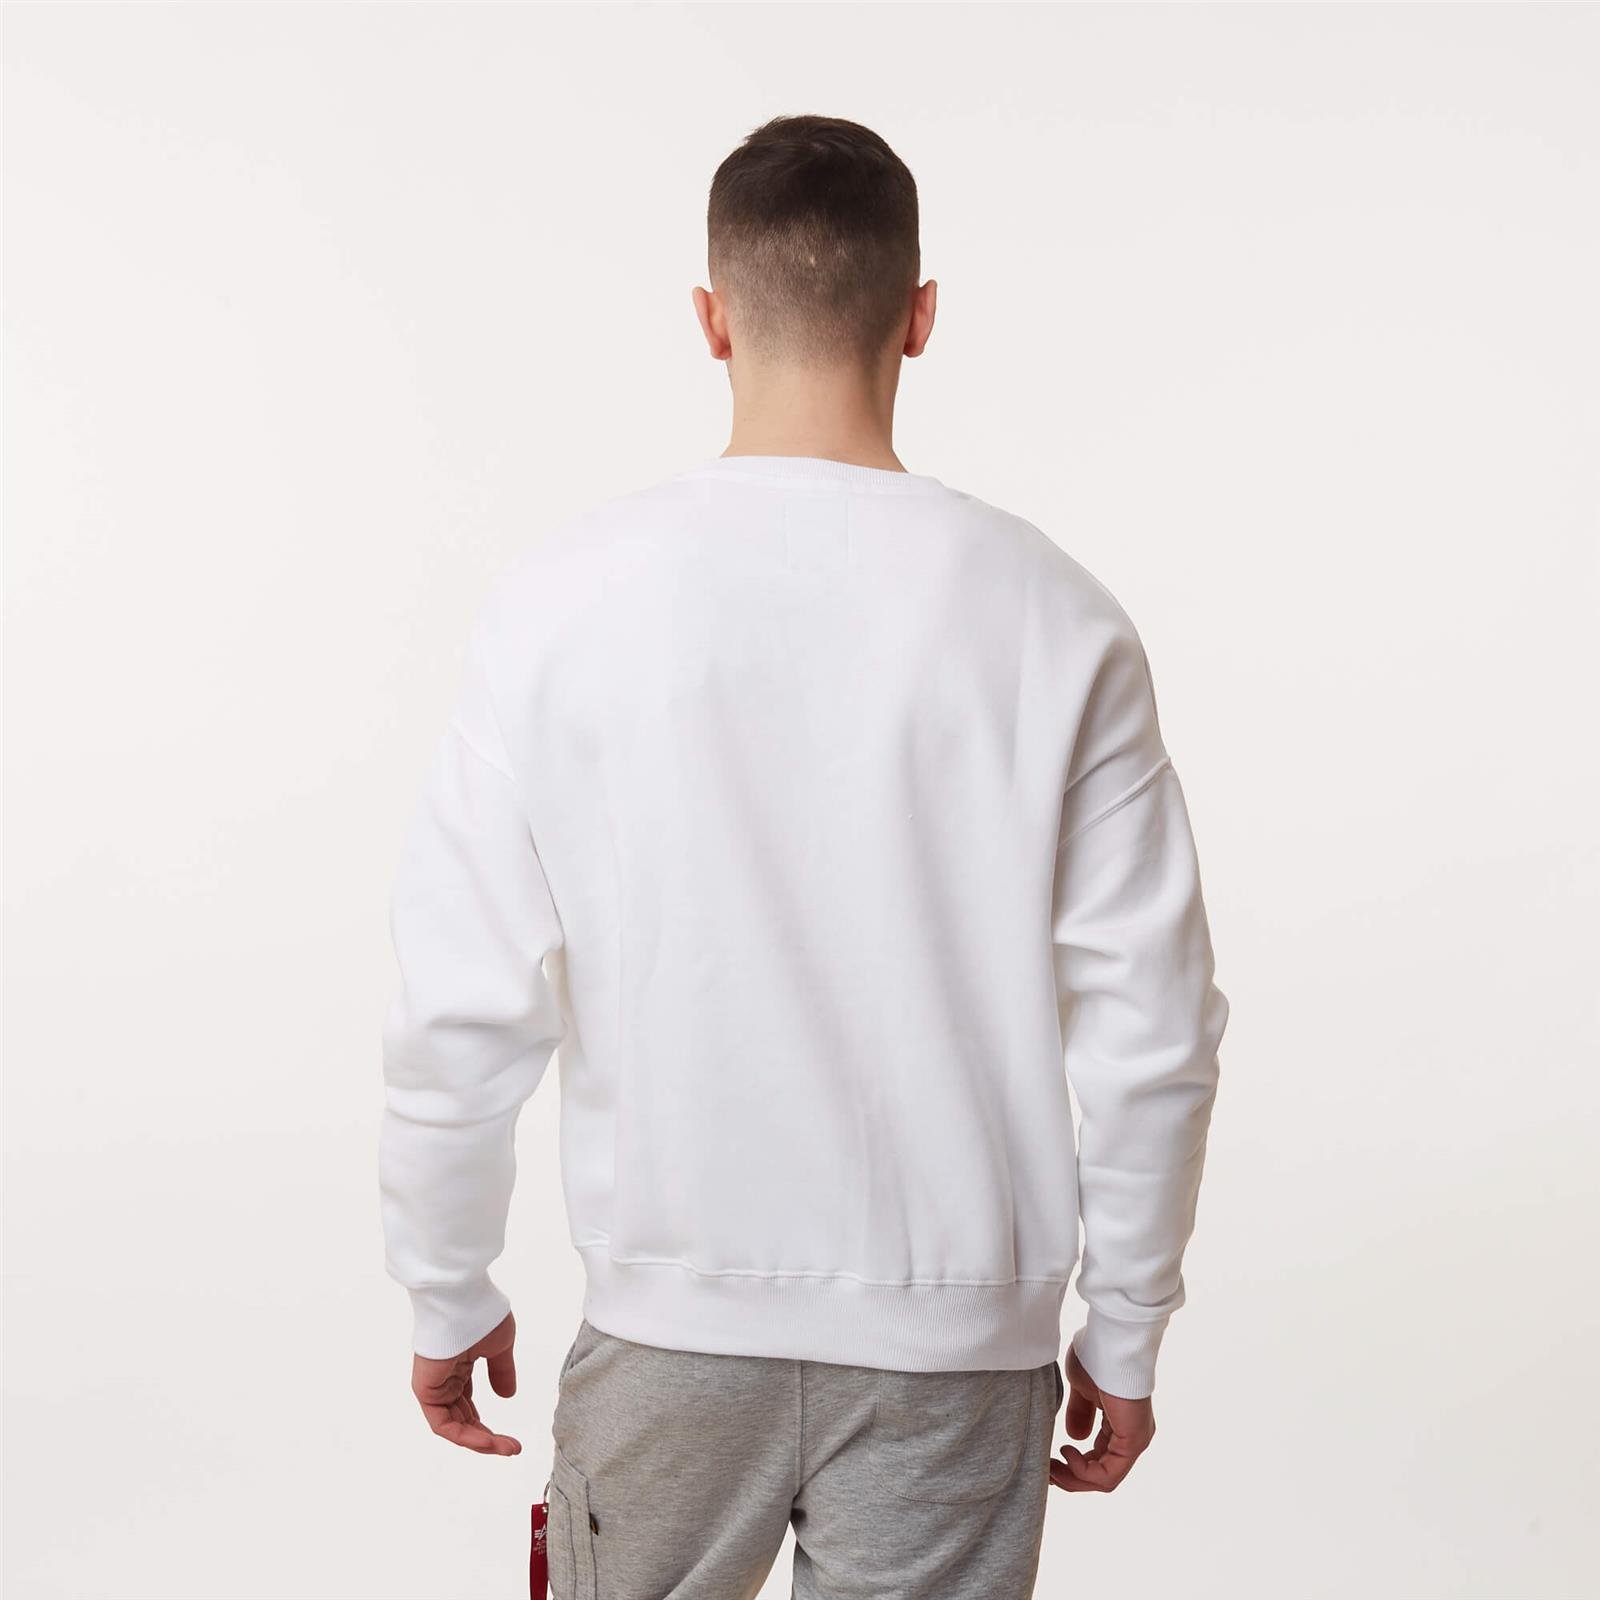 Alpha Industries BASIC OS SWEATER WHITE | Men \\ Men\'s clothing \\ Sweatshirts  Men \\ #Recommended clothing brands \\ Ellesse Brands \\ #Brands \\ Alpha  Industries